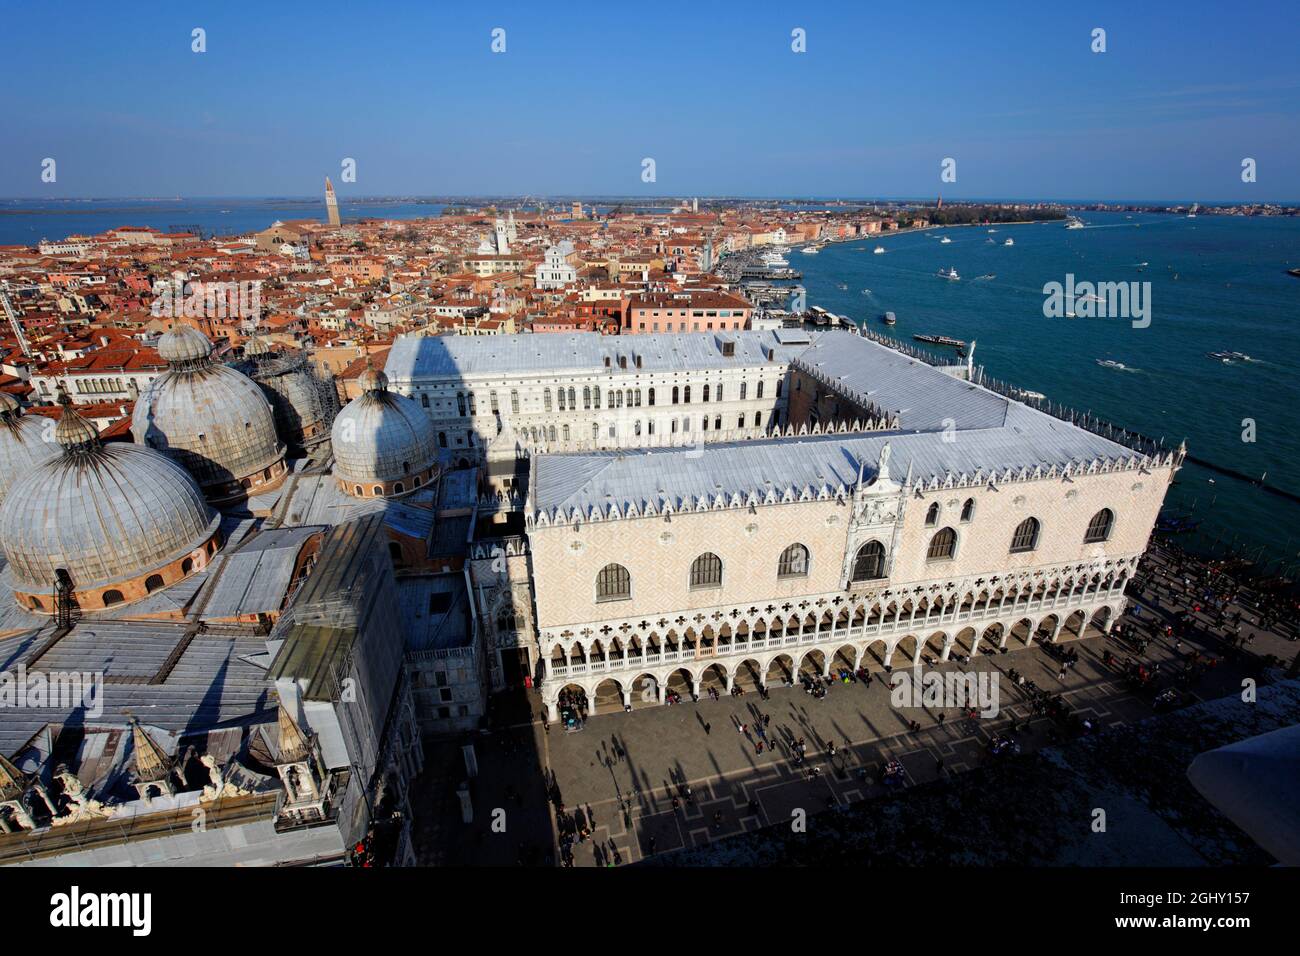 Elevated view of Doge's palace and the city, Venice, Italy Stock Photo